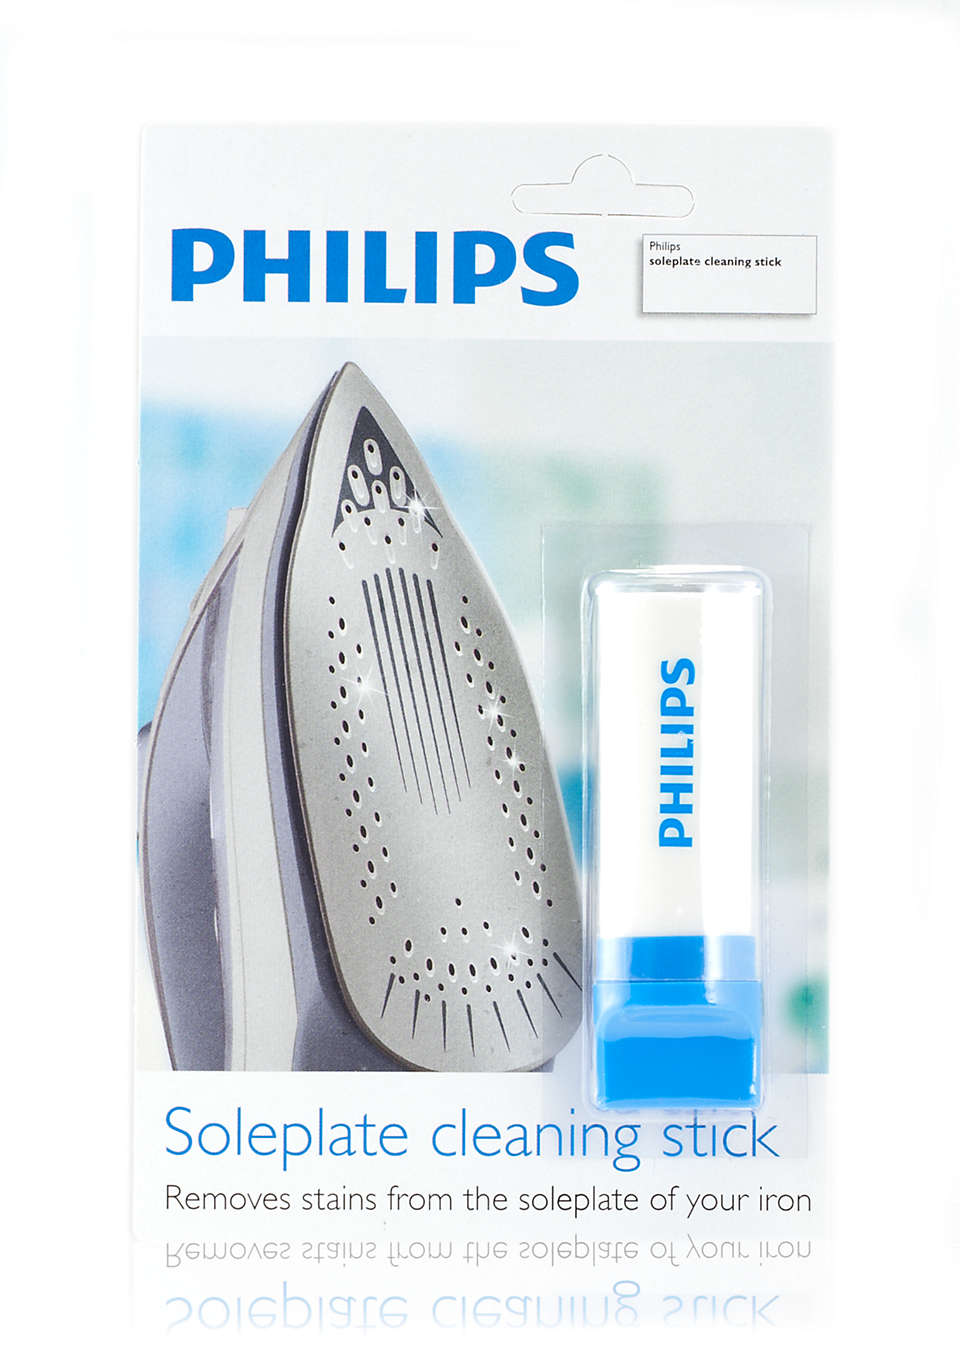 To clean the soleplate of your iron